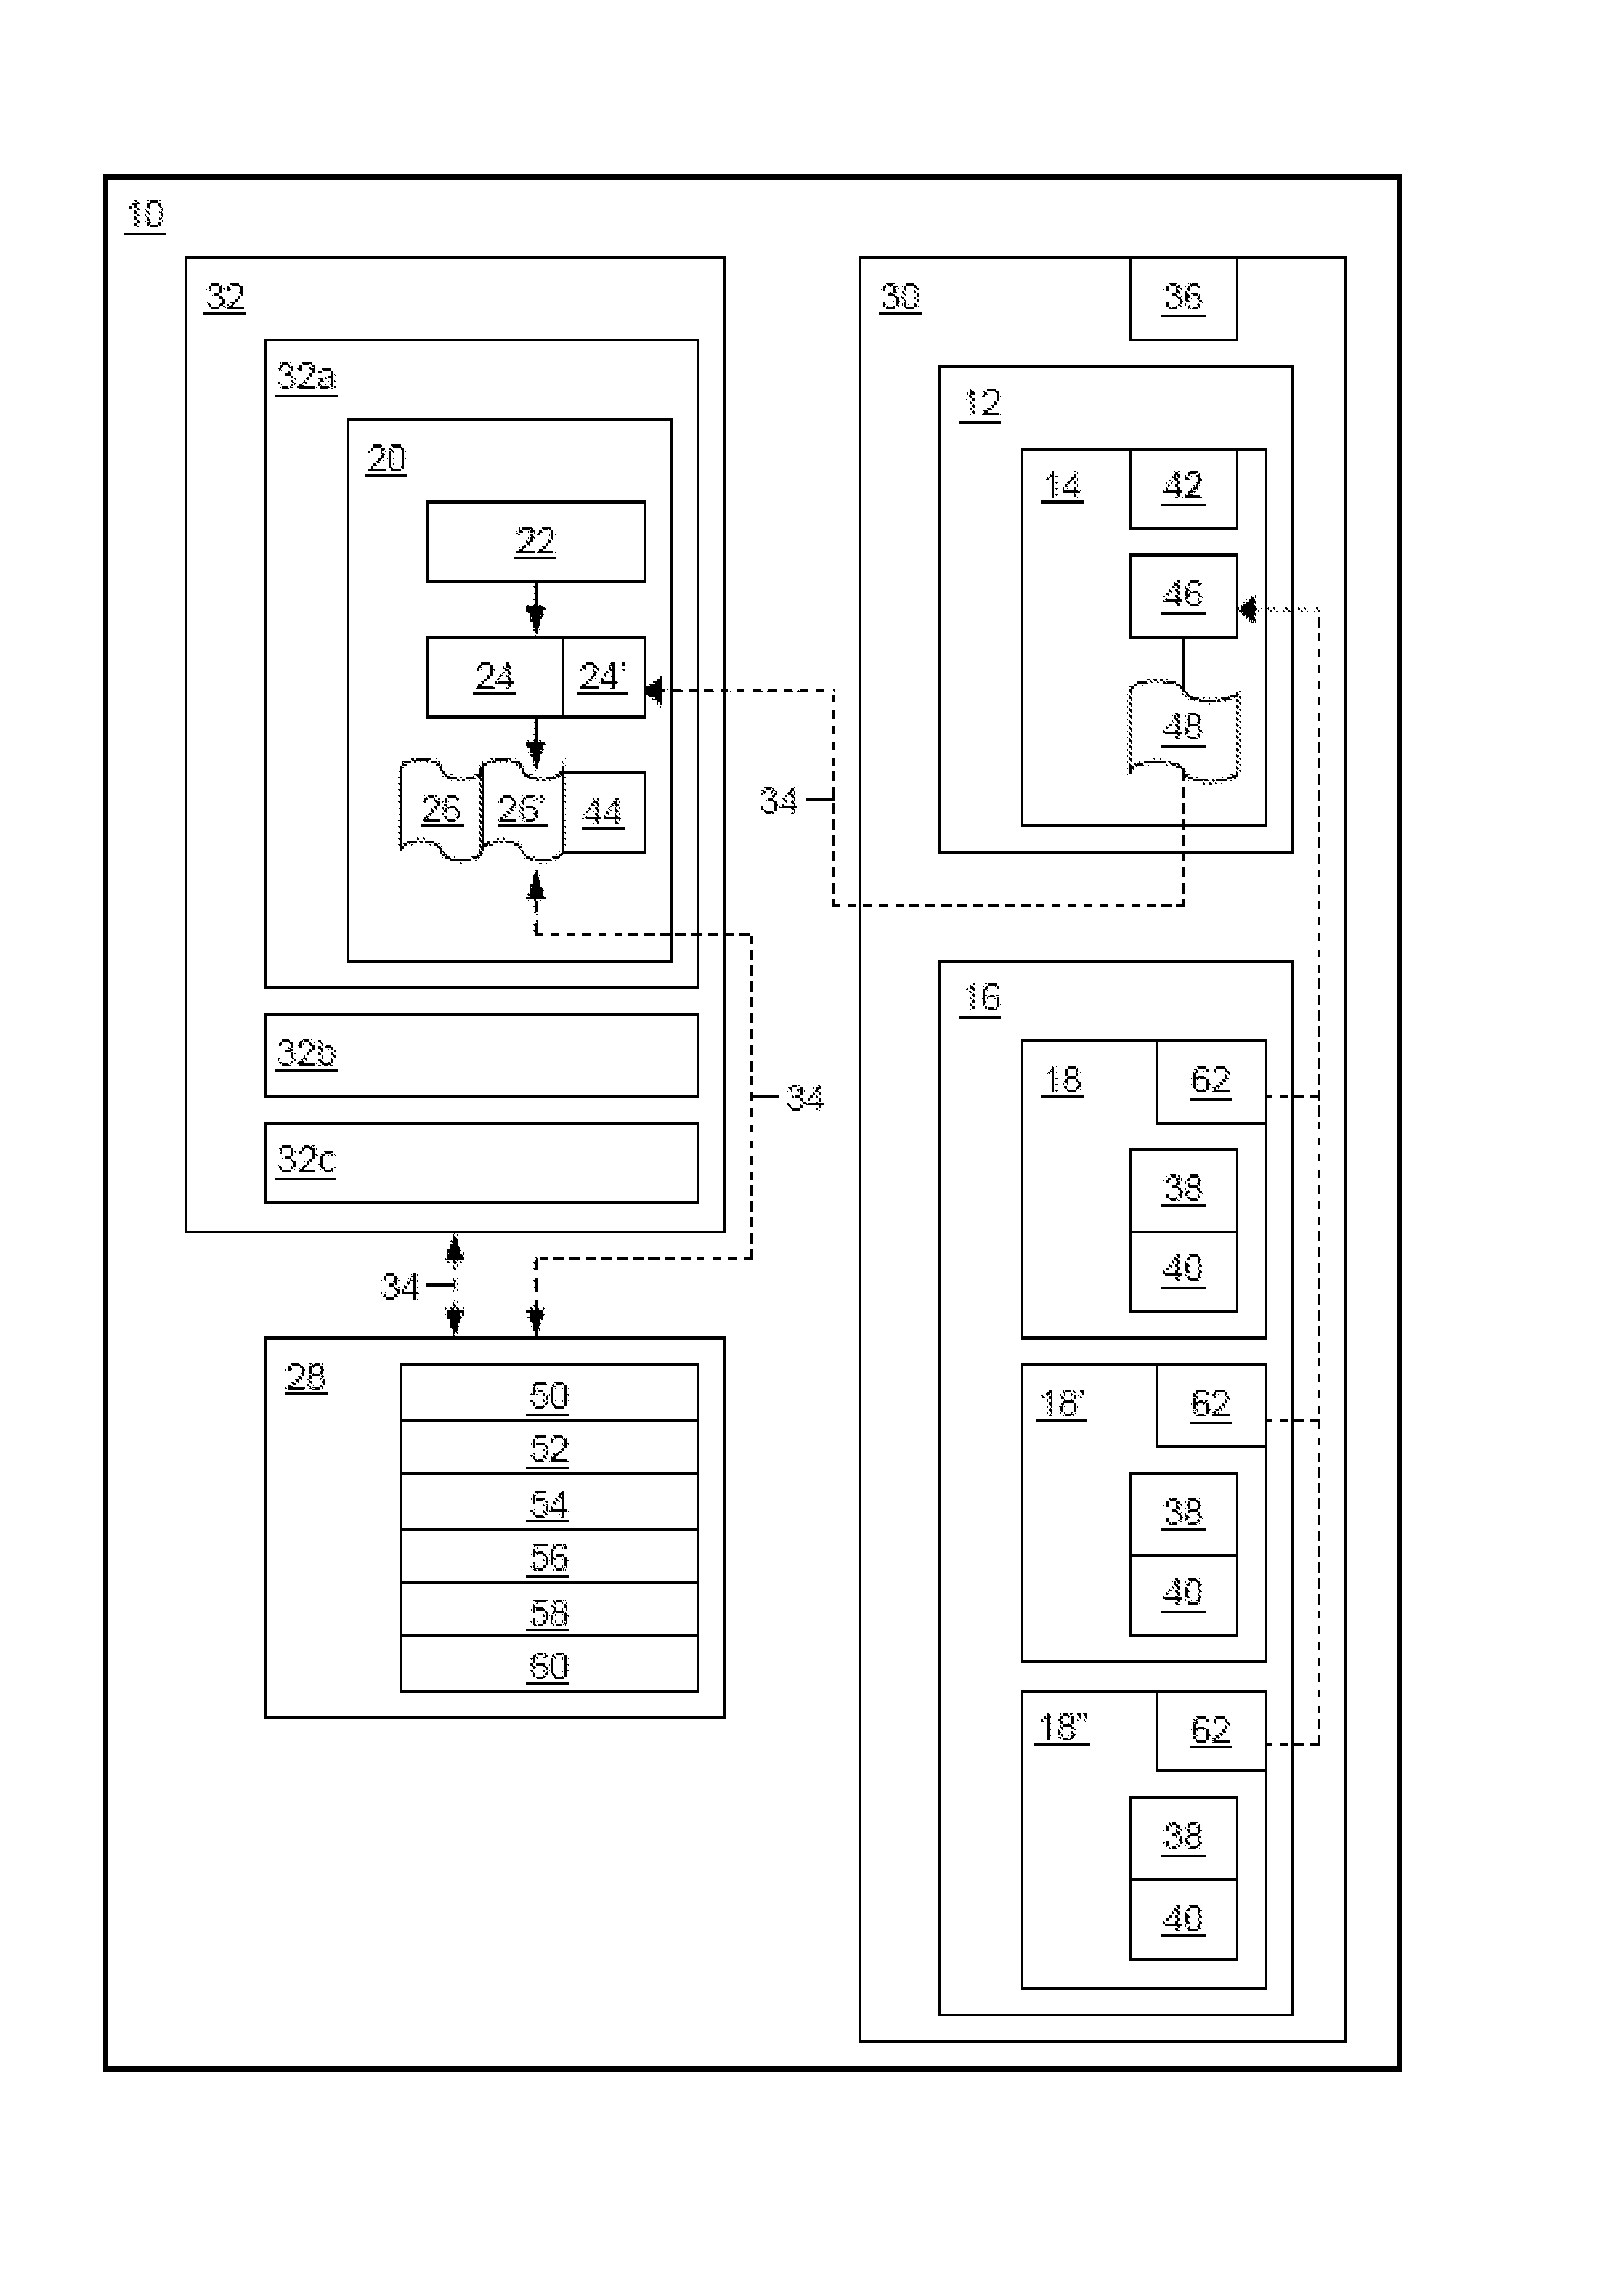 System and method for managing replacement of consumables including recyclable gas purifiers